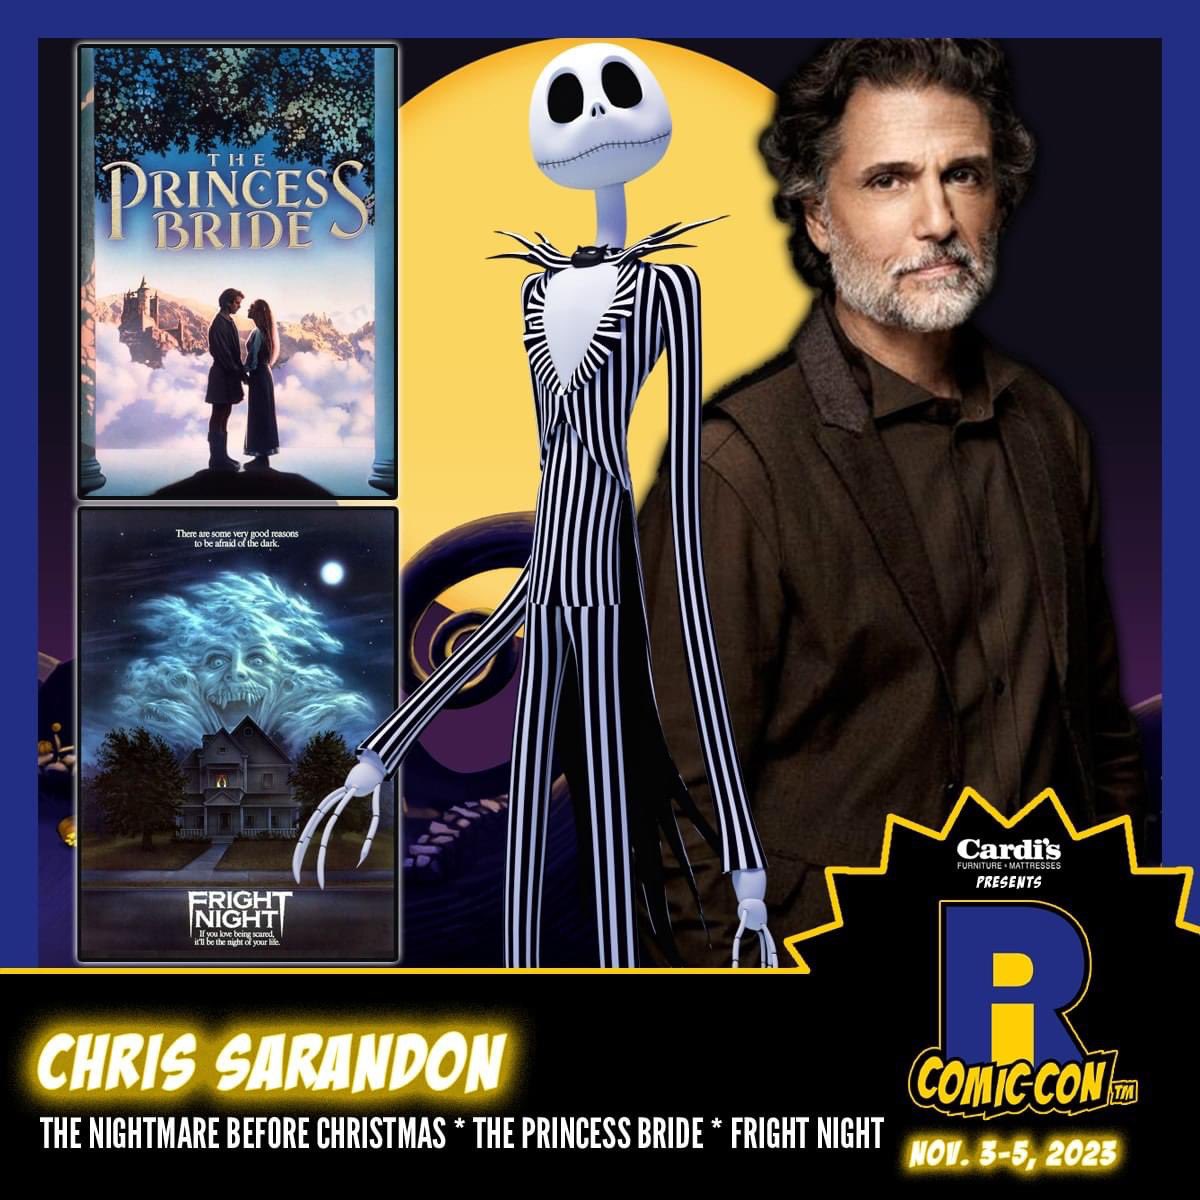 Excited about #rhodeislandcomicon this weekend (Friday/Saturday only). See you there! @ricomicconofficial #chrissarandon #cookingbyheart #jackskellington #comiccon #jerrydandridge #frightnight #princehumperdinck #theprincessbride #nightmarebeforechristmas